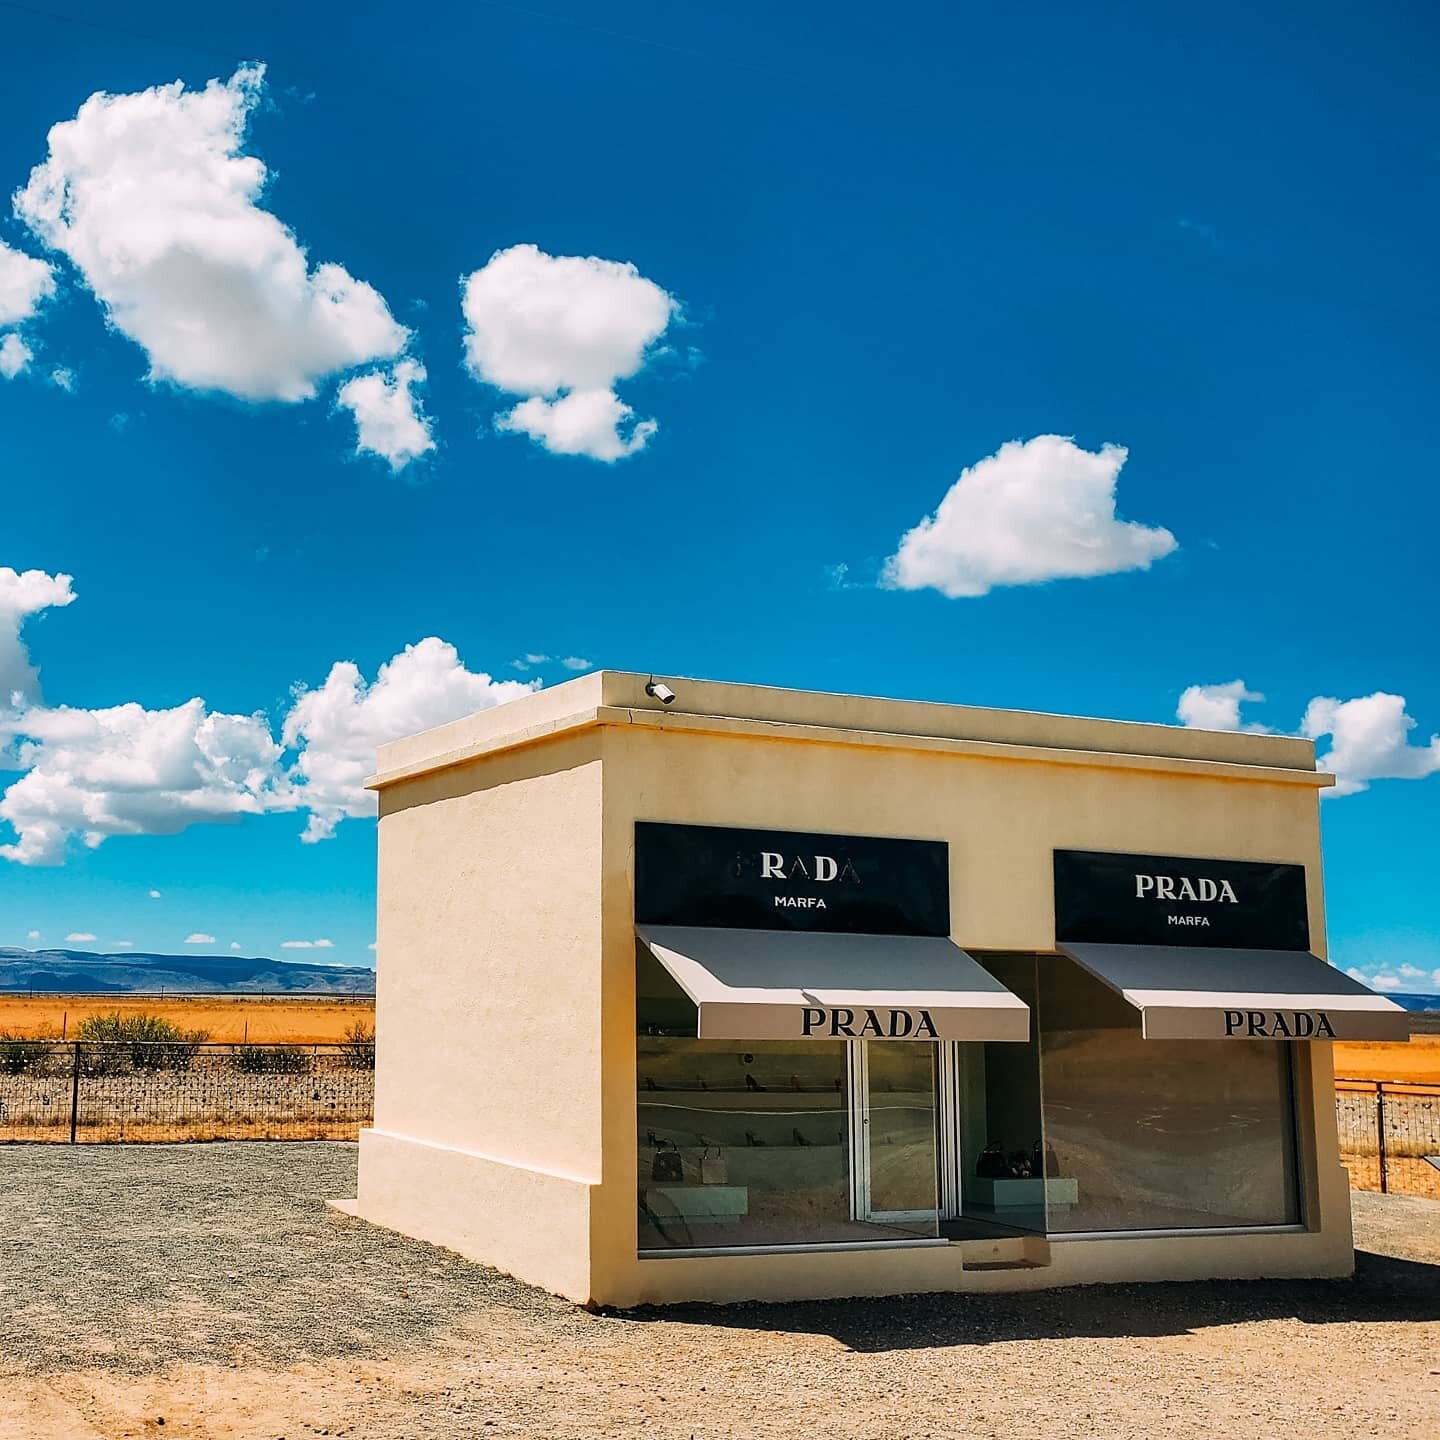 WEST TEXAS DESERT COUTURE 👠

In 2005, a Prada store appeared in the desert of West Texas. But you won't be swiping your card there.

💫 This art installation and non-functioning store was created by Berlin-based duo Elmgreen &amp; Dragset.
💫 Built 